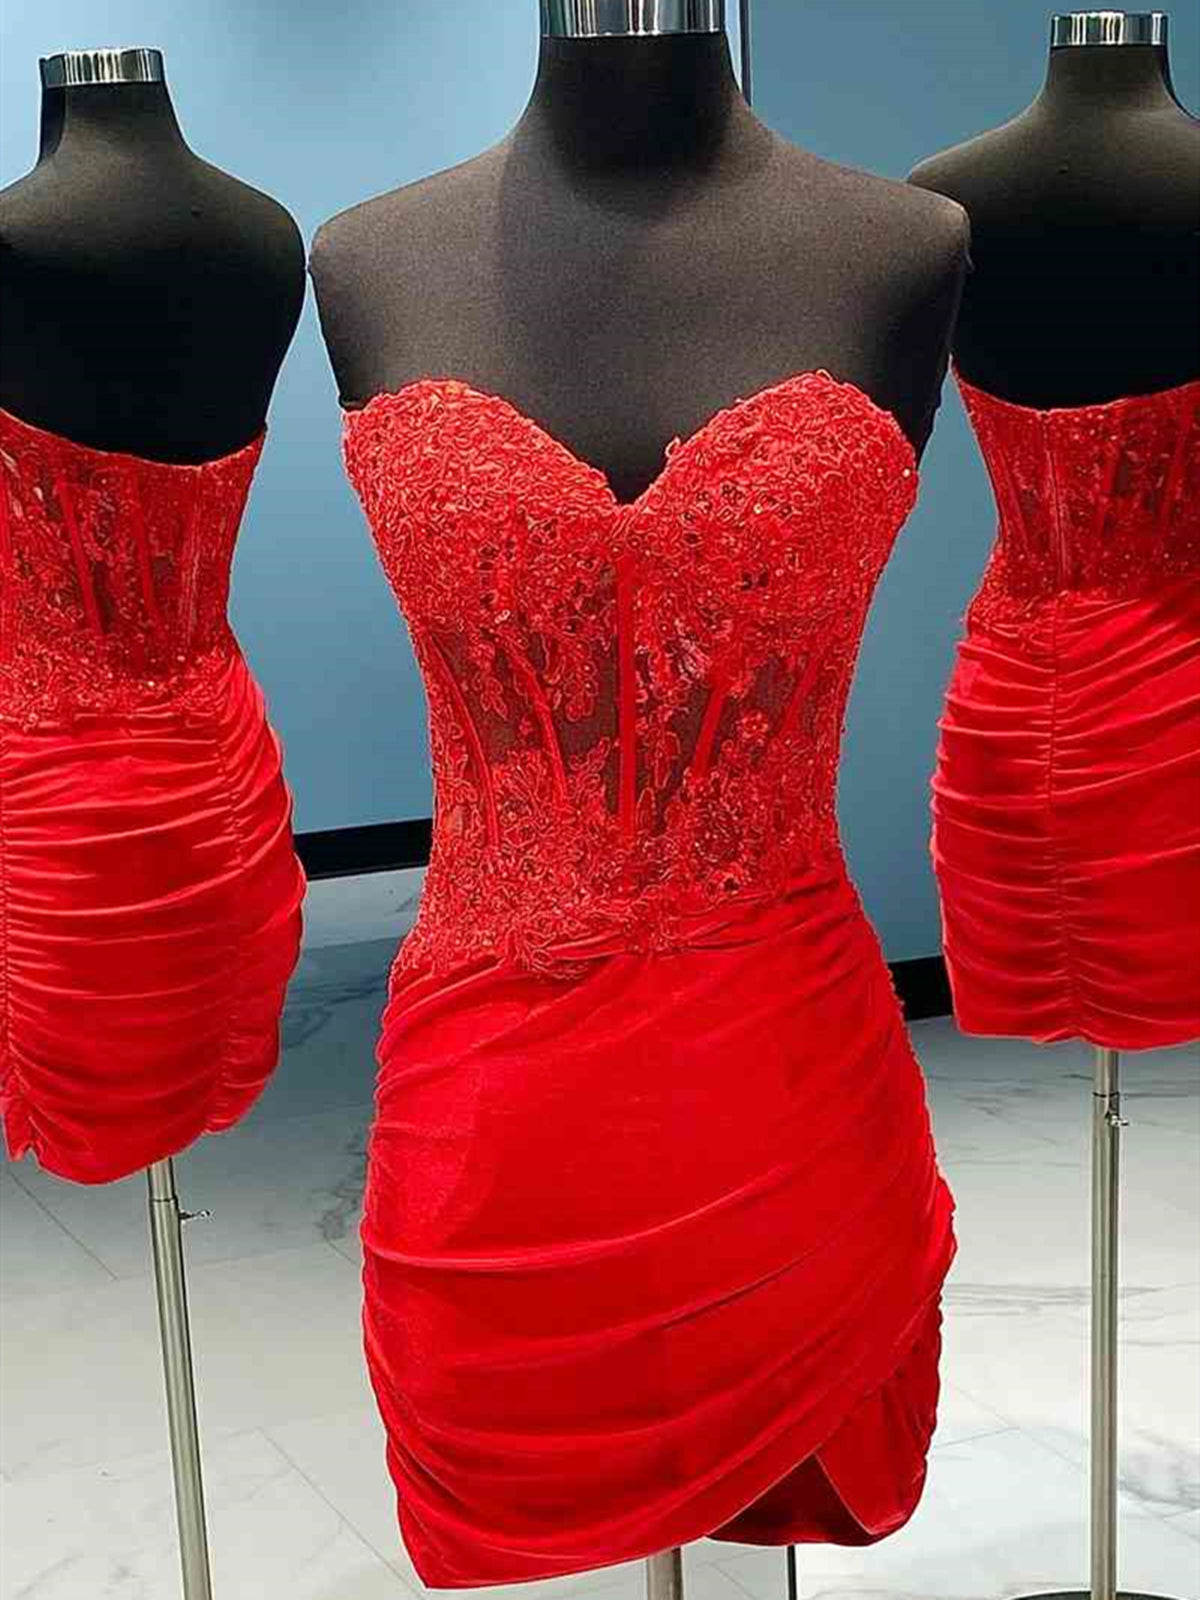 Sweetheart Neck Short Red Lace Corset Prom Dresses, Short Red Lace Corset Formal Corset Homecoming Dresses outfit, Bridesmaids Dresses Neutral